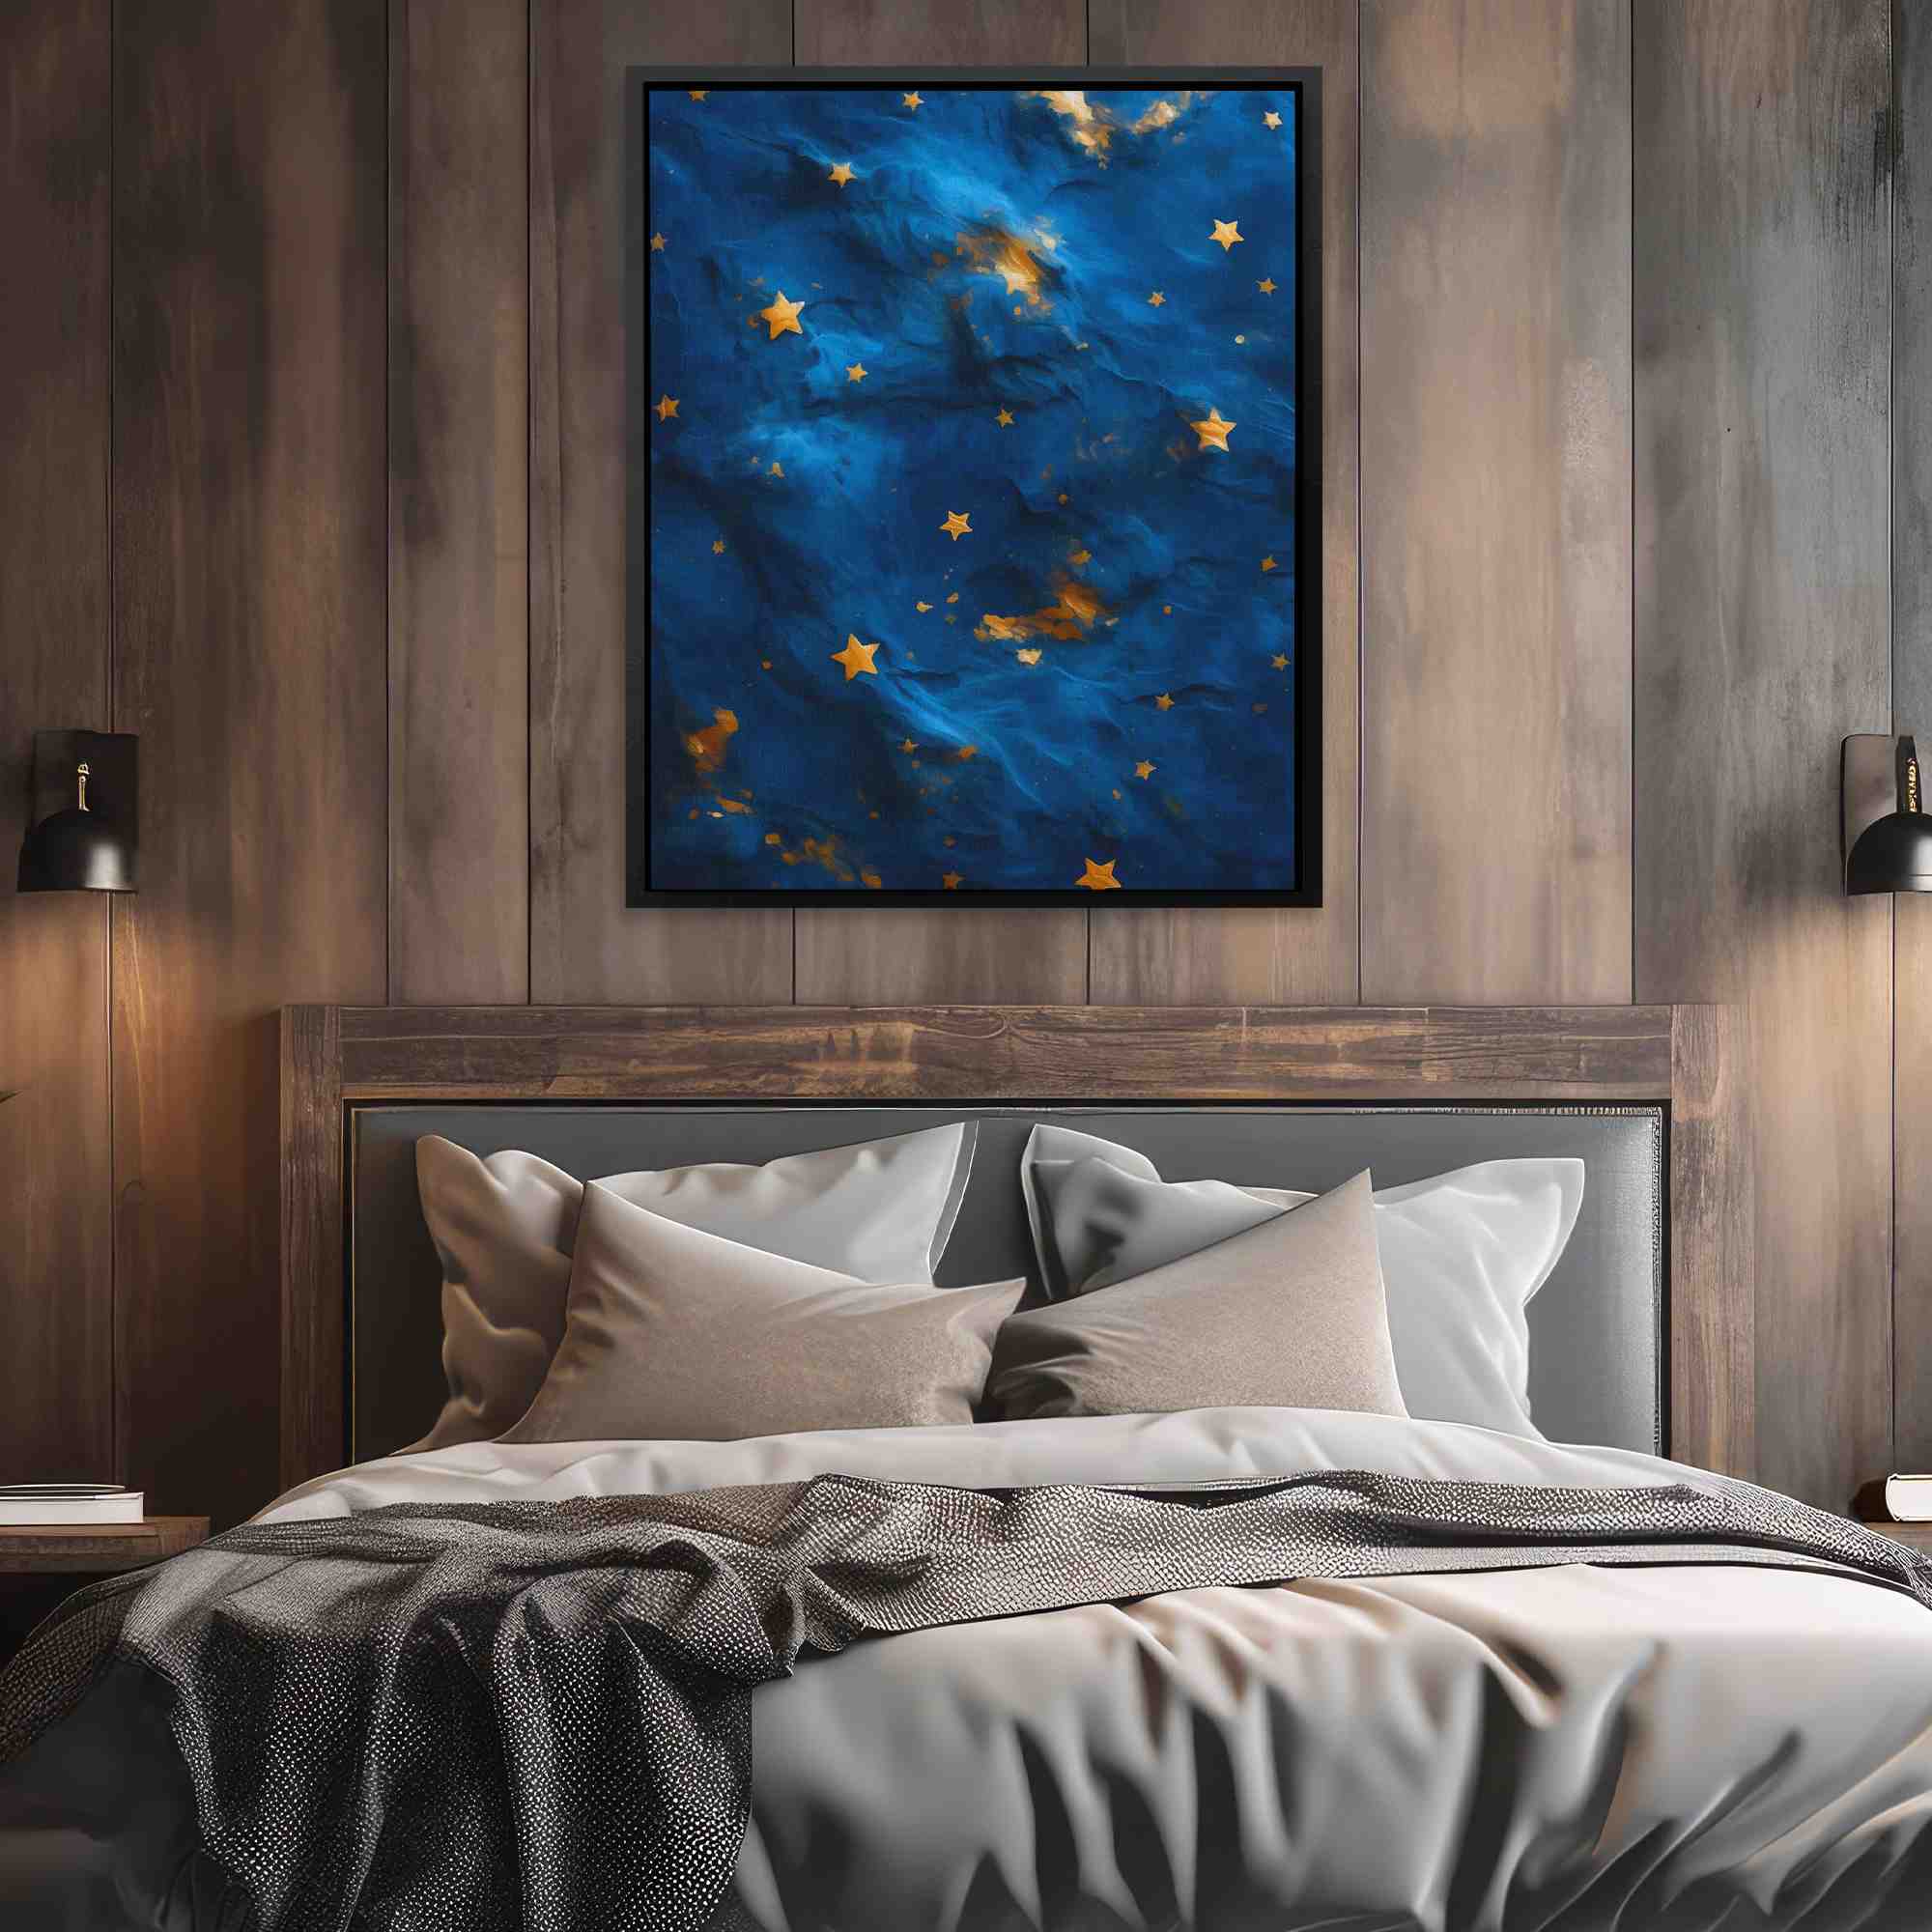 a painting of gold stars on a blue background